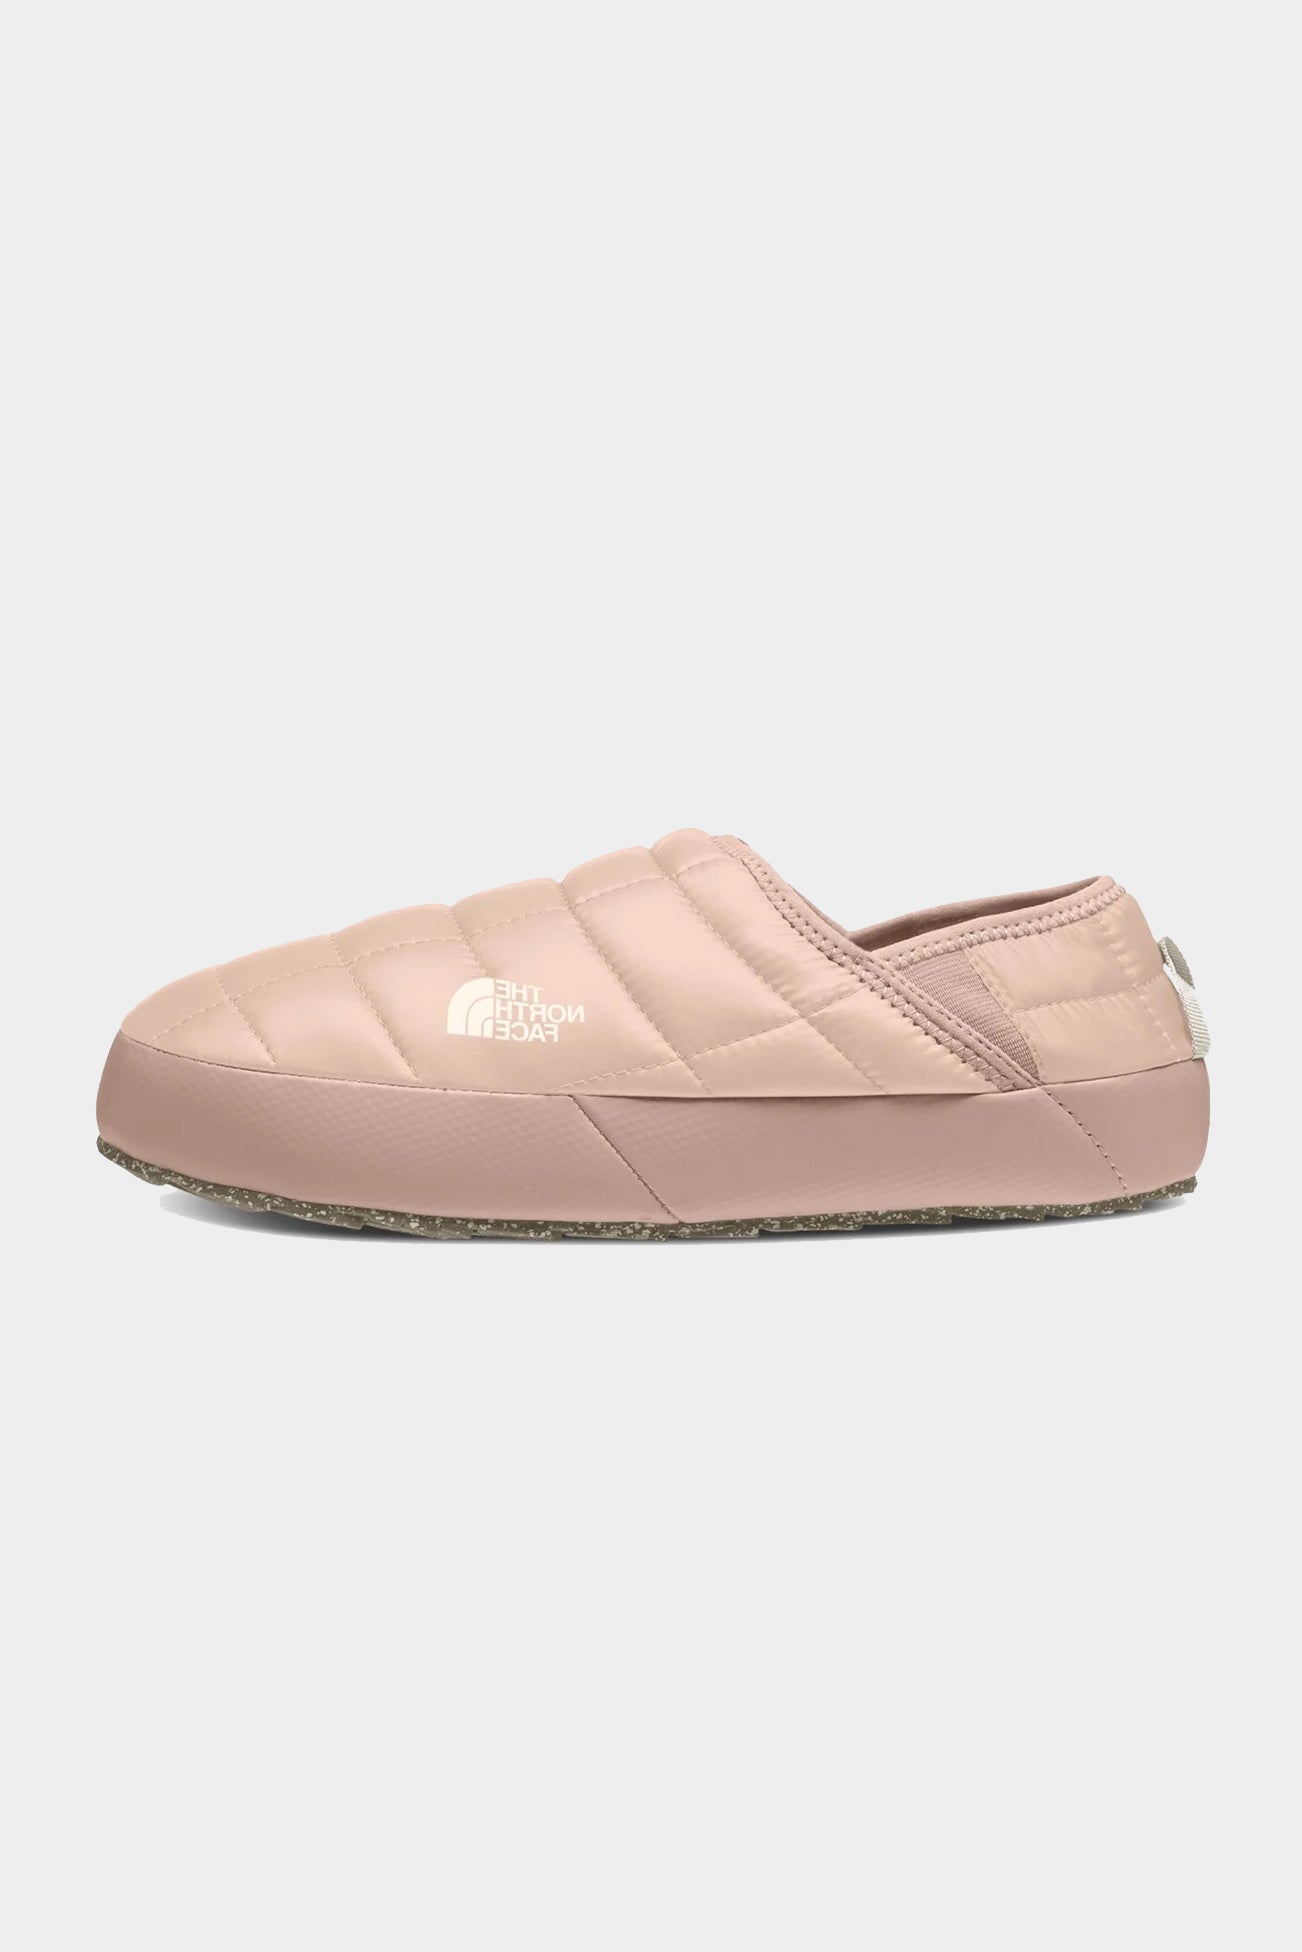 ThermoBall Traction Mules V Footwear The North Face   